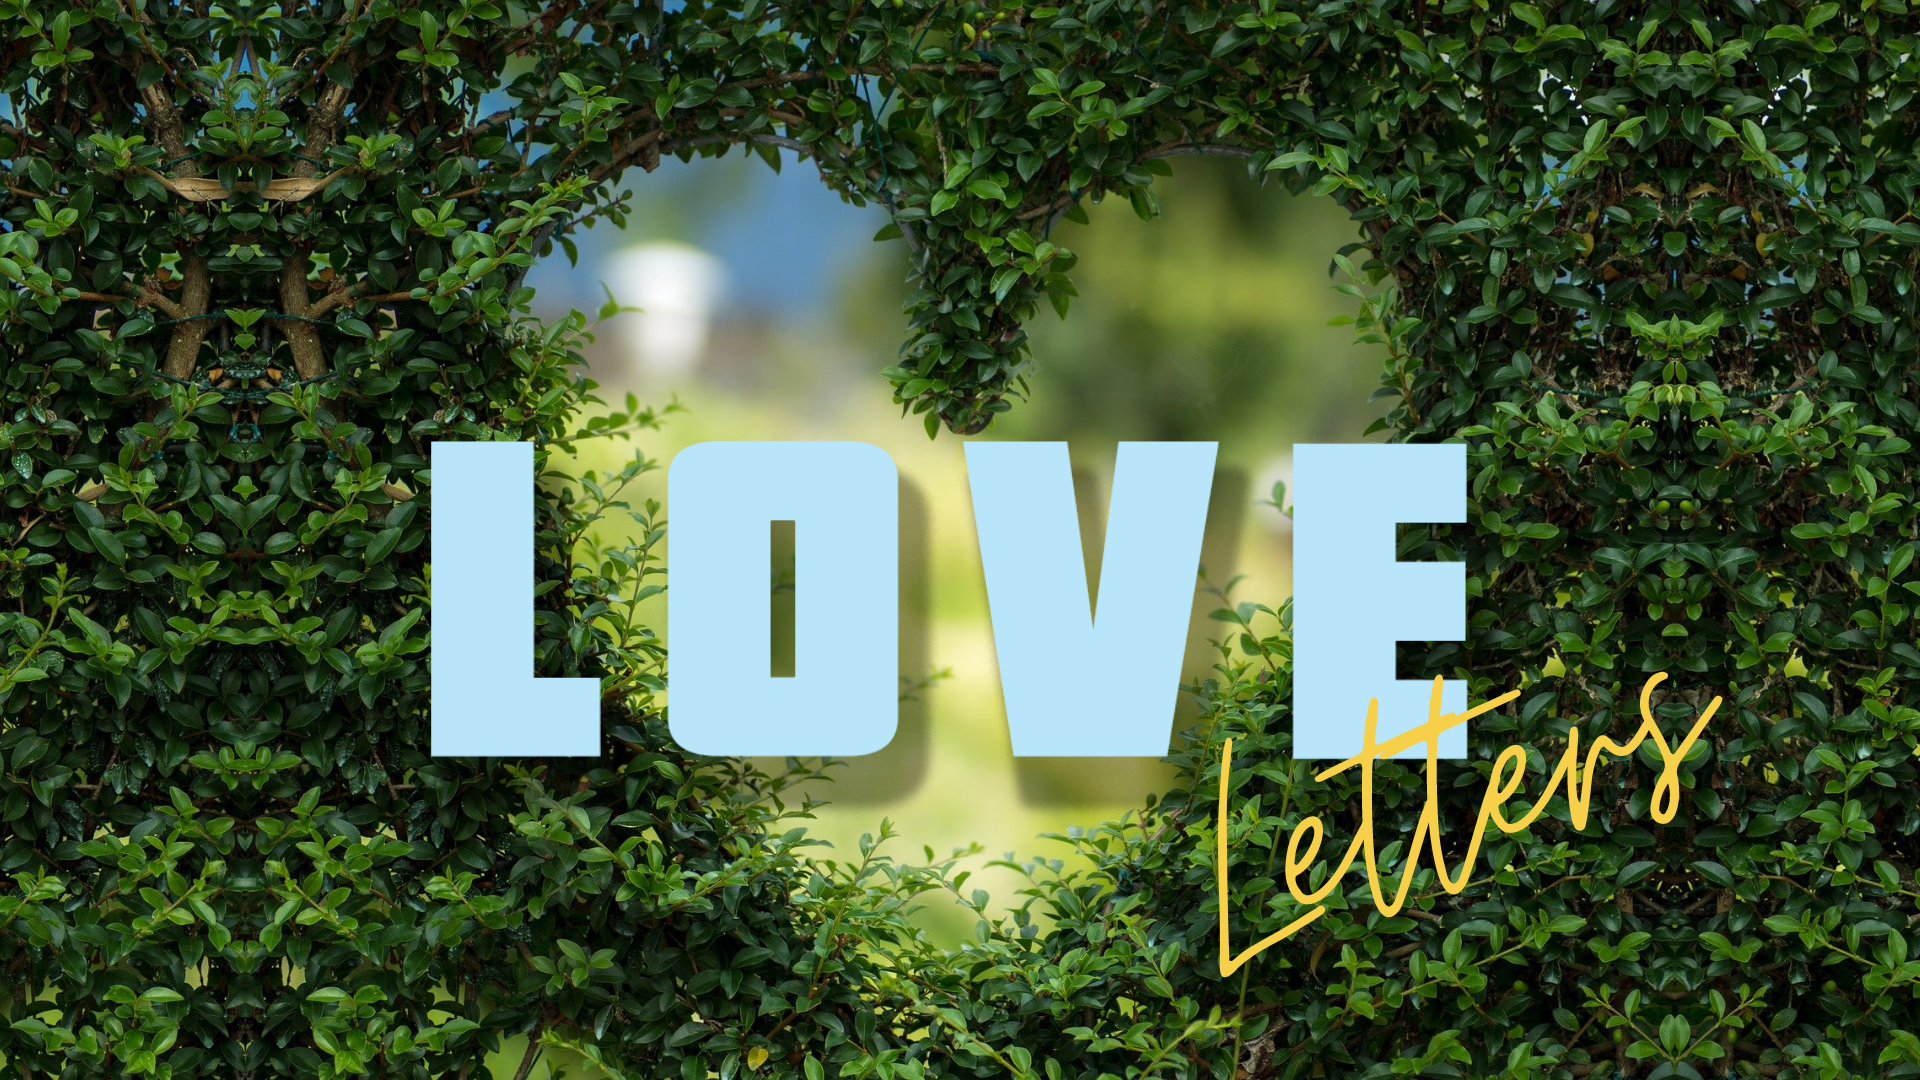 Lush dark green shrubbery with a heart shape cut out of the green bush at the very centre. Text seen in the centre of the heart reads “LOVE Letters,” with “LOVE” seen in pale blue block letters, and “Letters” in cursive and a mustard yellow colour.